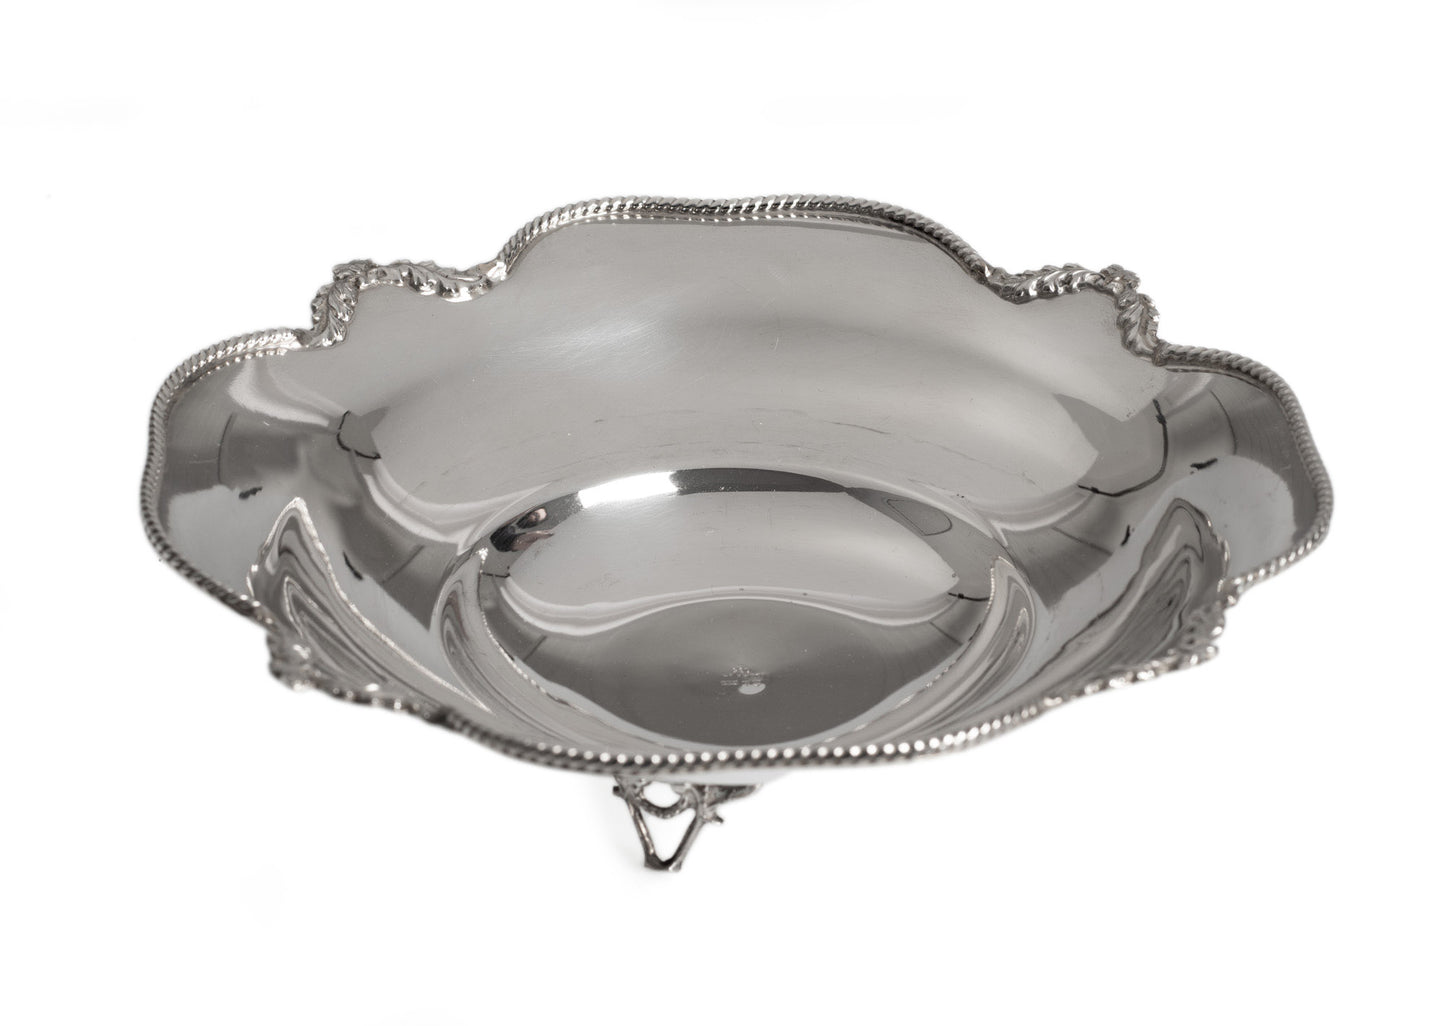 Vintage Greek/Cypriot XEIPOΣ Silver Fruit/Sweetmeat Bowl with Rope Edge Rim (Code 2410)